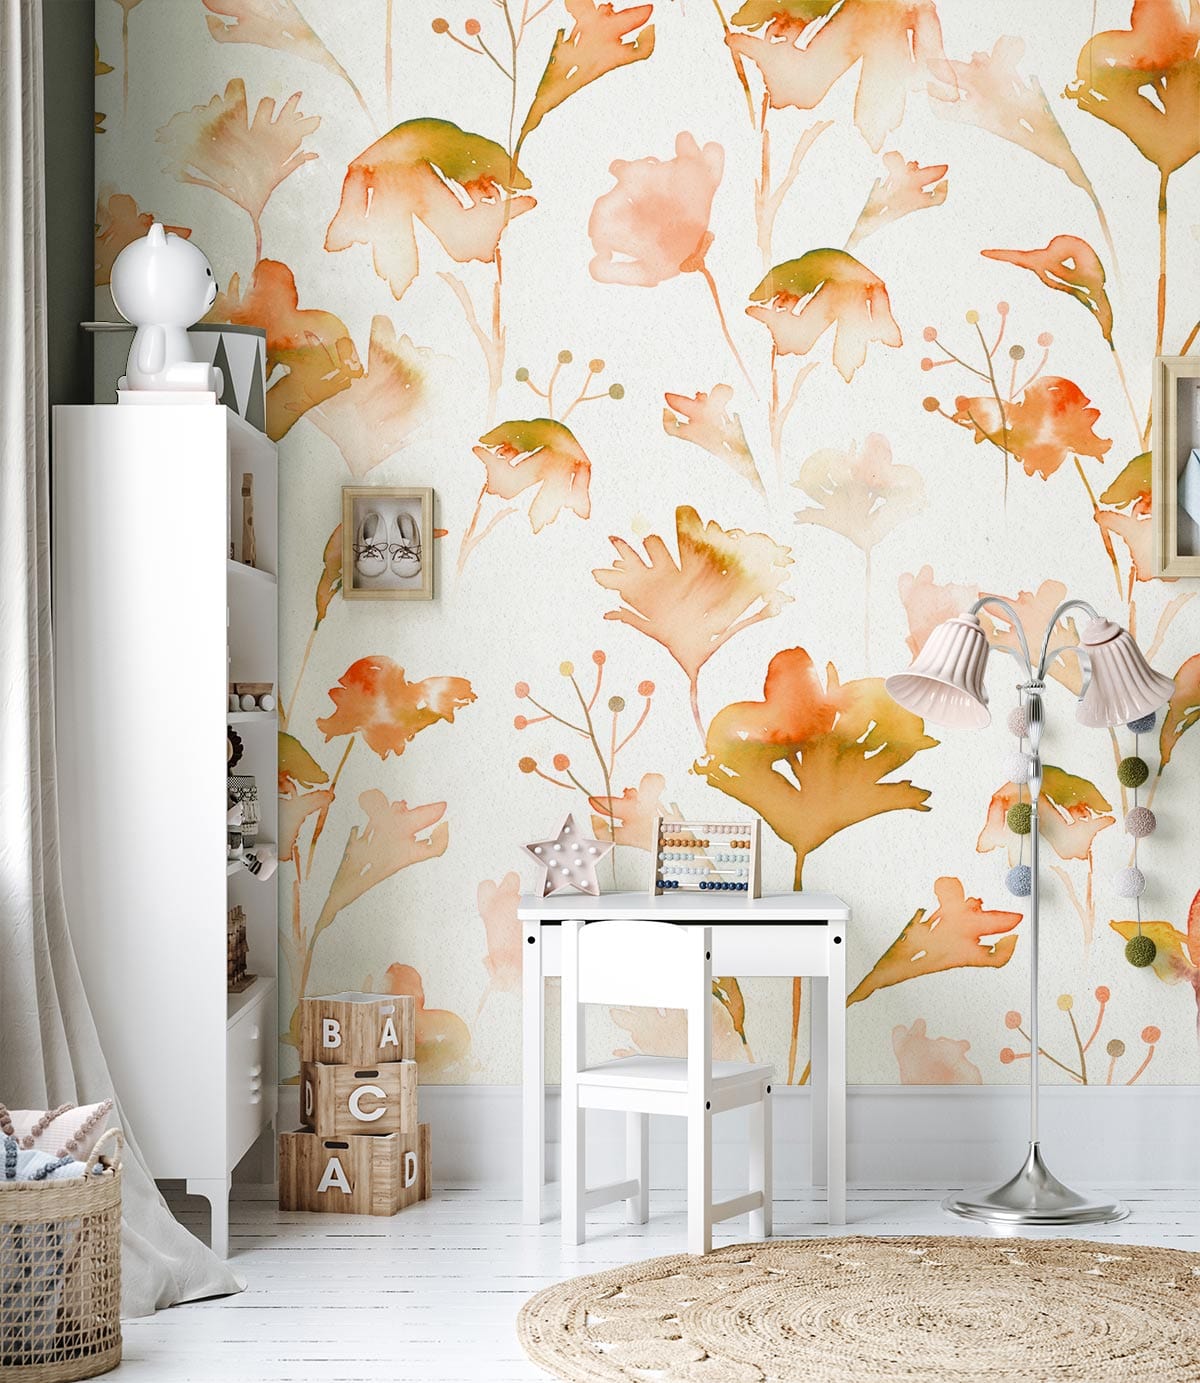 Ginkgo Tree Shedding Its Leaves in the Fall Wallpaper Mural for the Living Room